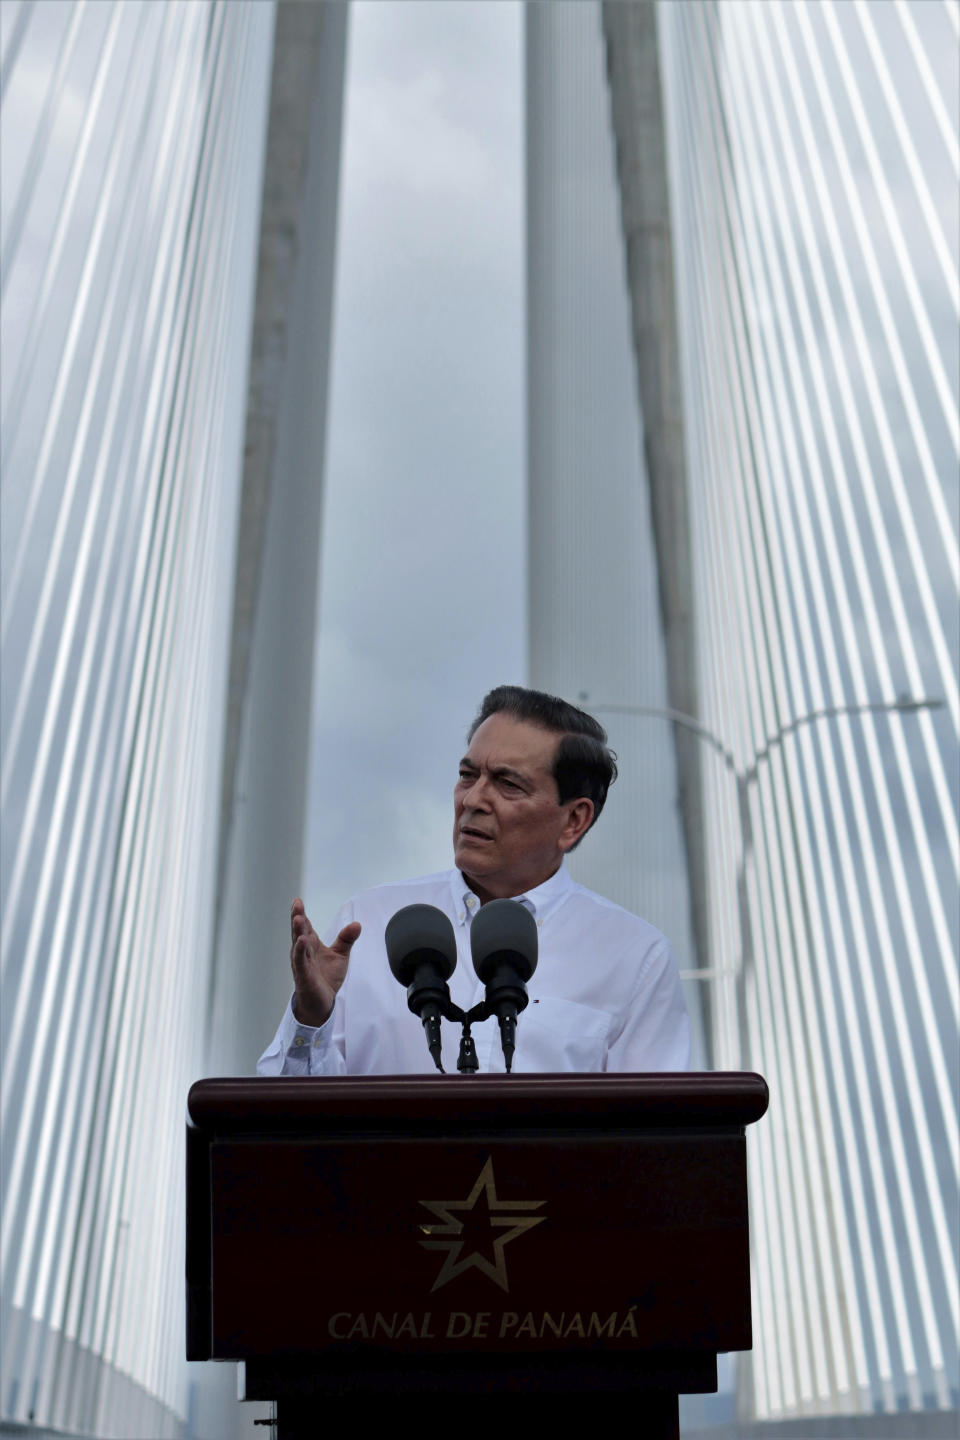 Panama's President Laurentino Cortizo speaks during the opening of the new bridge that spans the Panama Canal, in Colon, Panama, Friday, August 2, 2019. The 4.6 km bridge spans the canal but on the Caribbean side of the country. (AP Photo/Eric Batista)